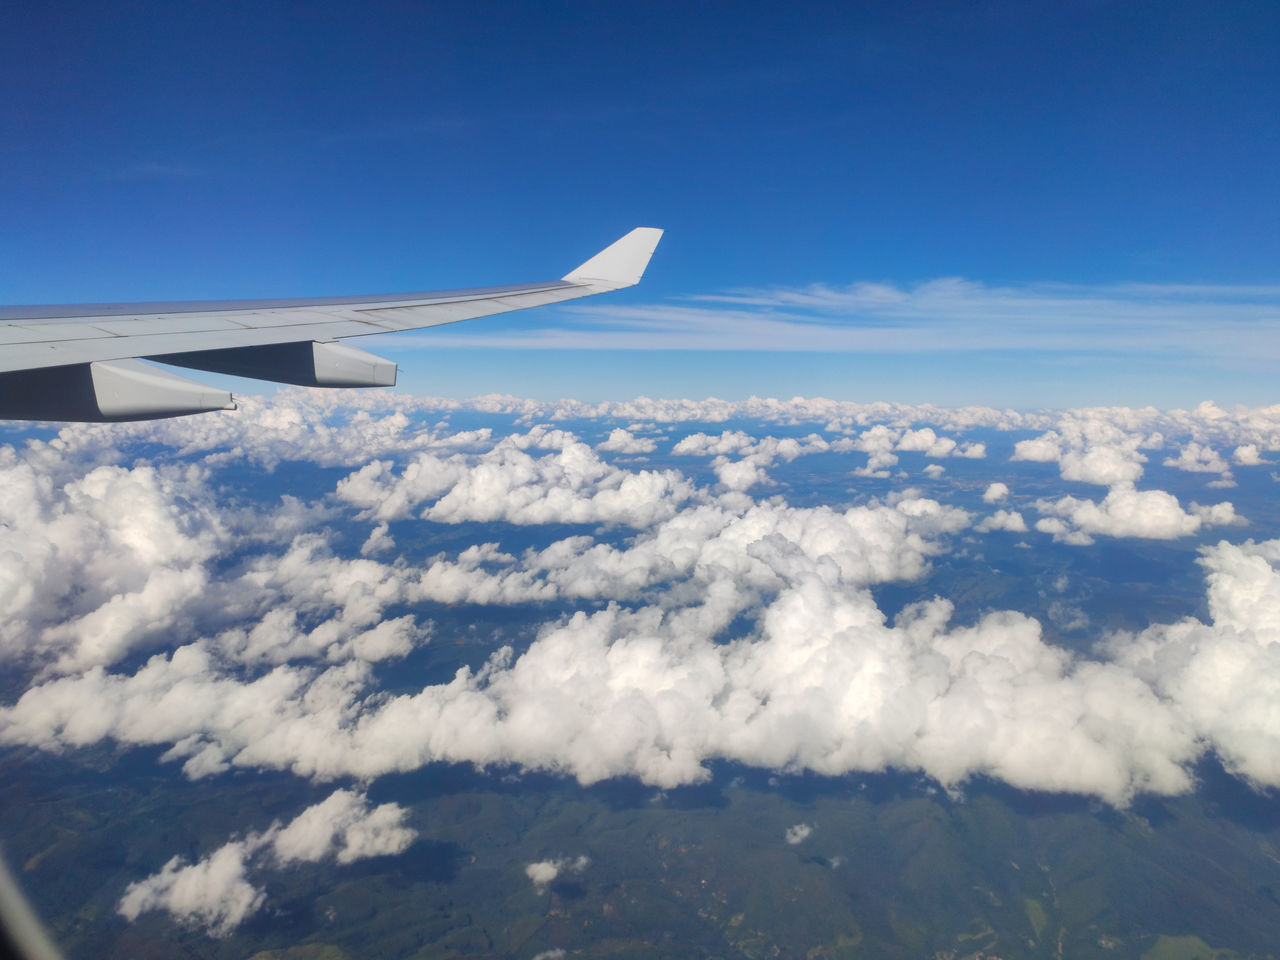 airplane, air vehicle, flying, aircraft wing, transportation, mode of transportation, sky, cloud, aerial view, travel, air travel, nature, aircraft, blue, environment, vehicle, journey, mid-air, aviation, no people, cloudscape, scenics - nature, day, on the move, wing, beauty in nature, outdoors, landscape, high up, window, airliner, motion, above, horizon, vehicle interior